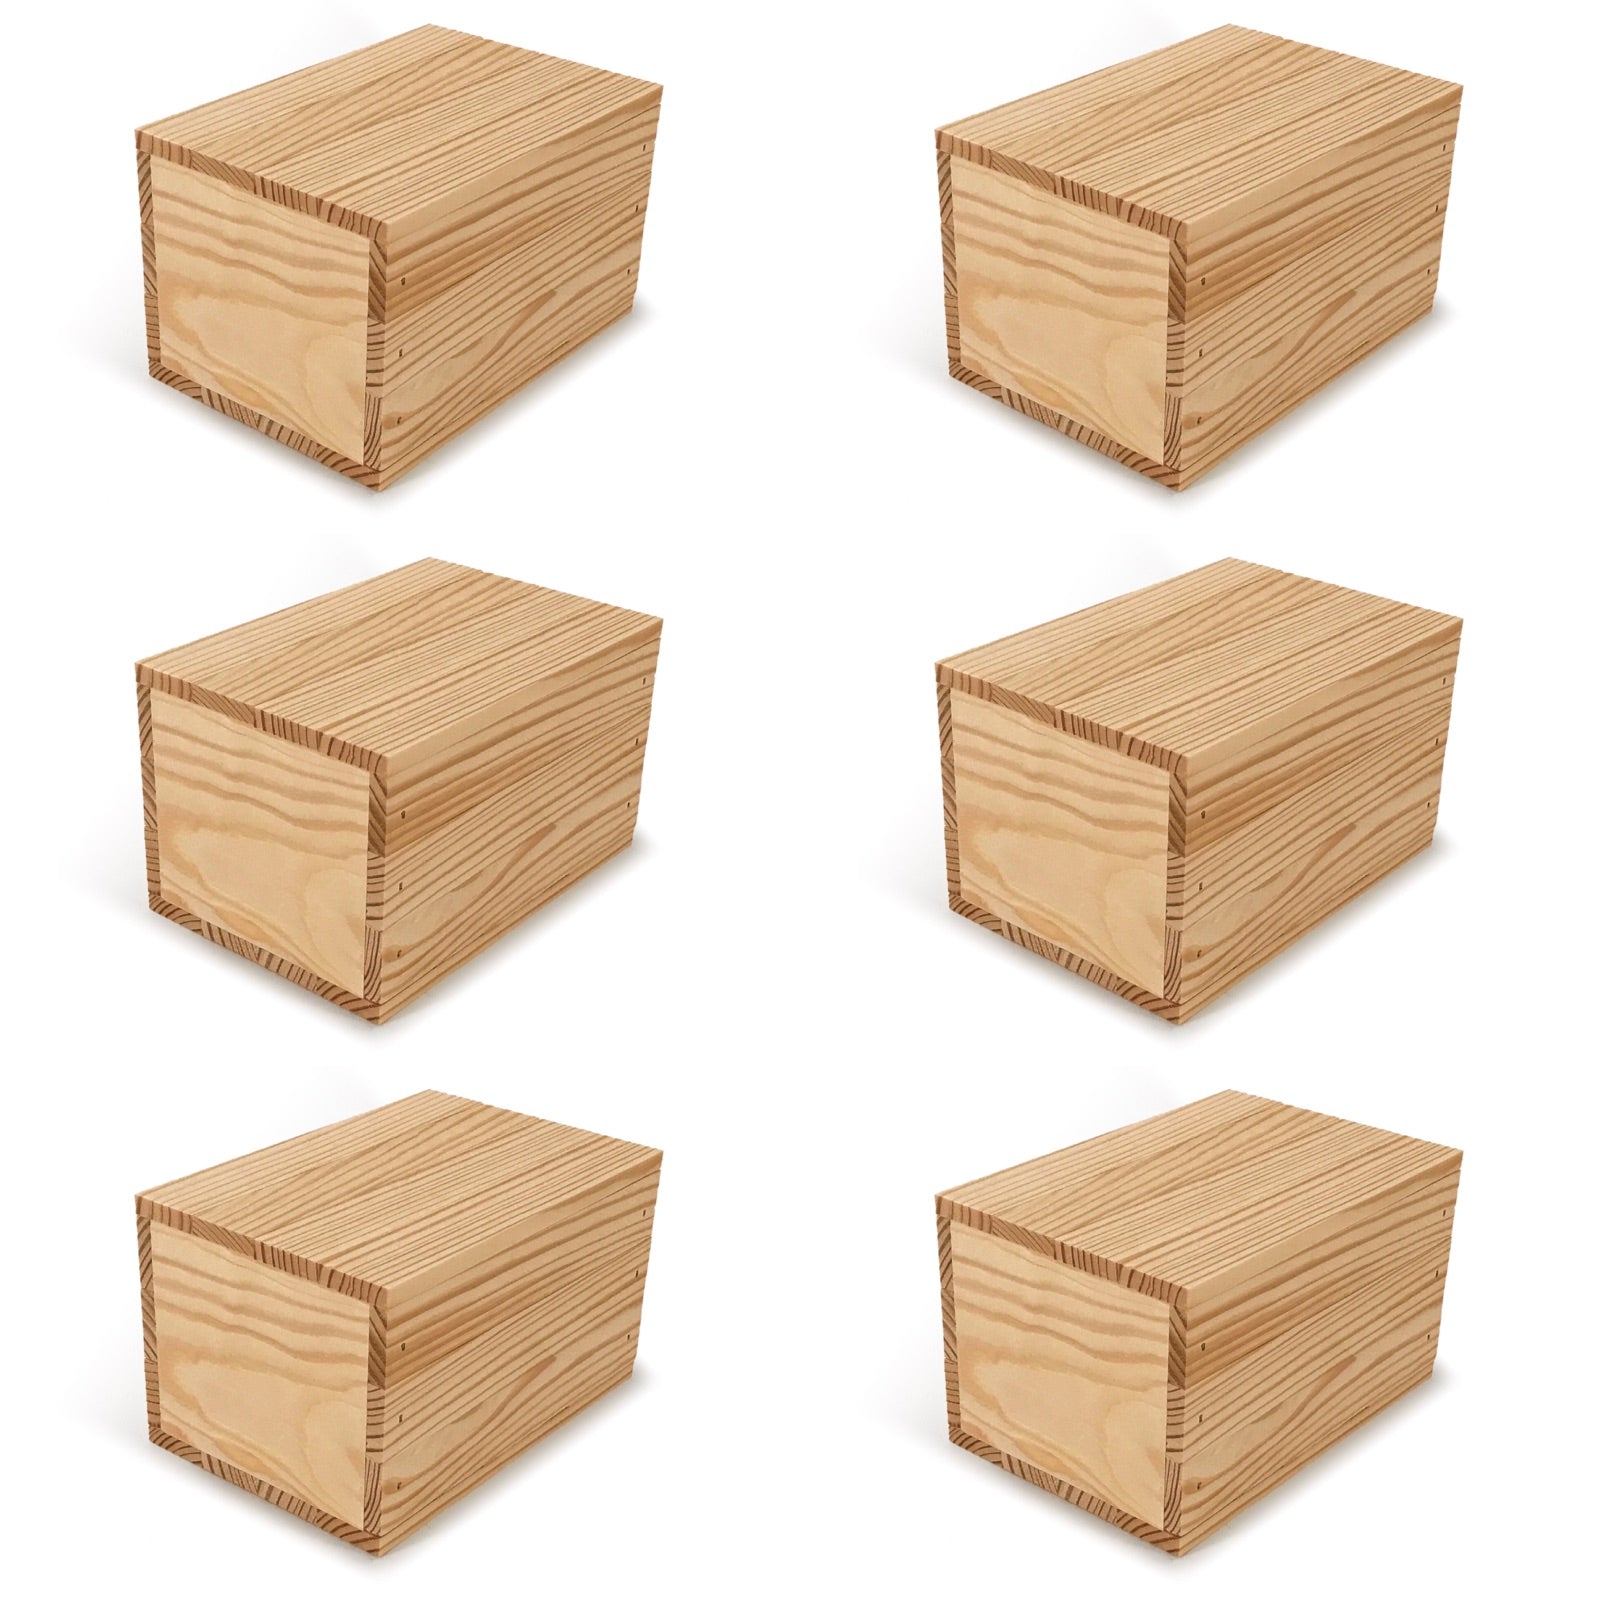 6 Small wooden crates with lid 7x5x4.25